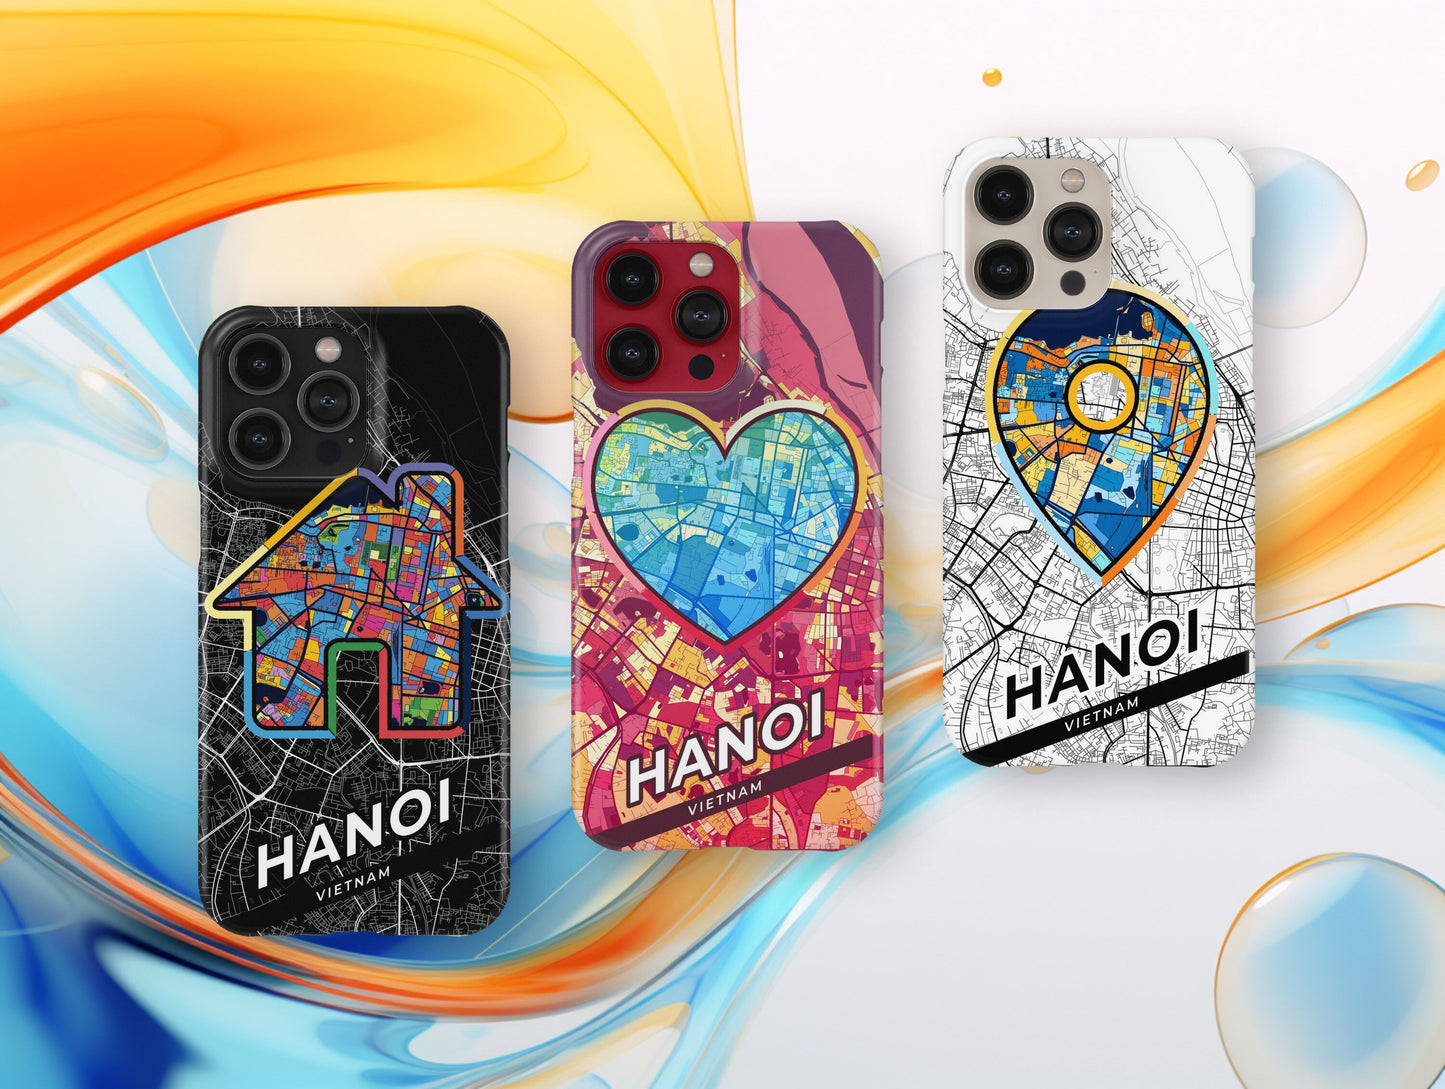 Hanoi Vietnam slim phone case with colorful icon. Birthday, wedding or housewarming gift. Couple match cases.